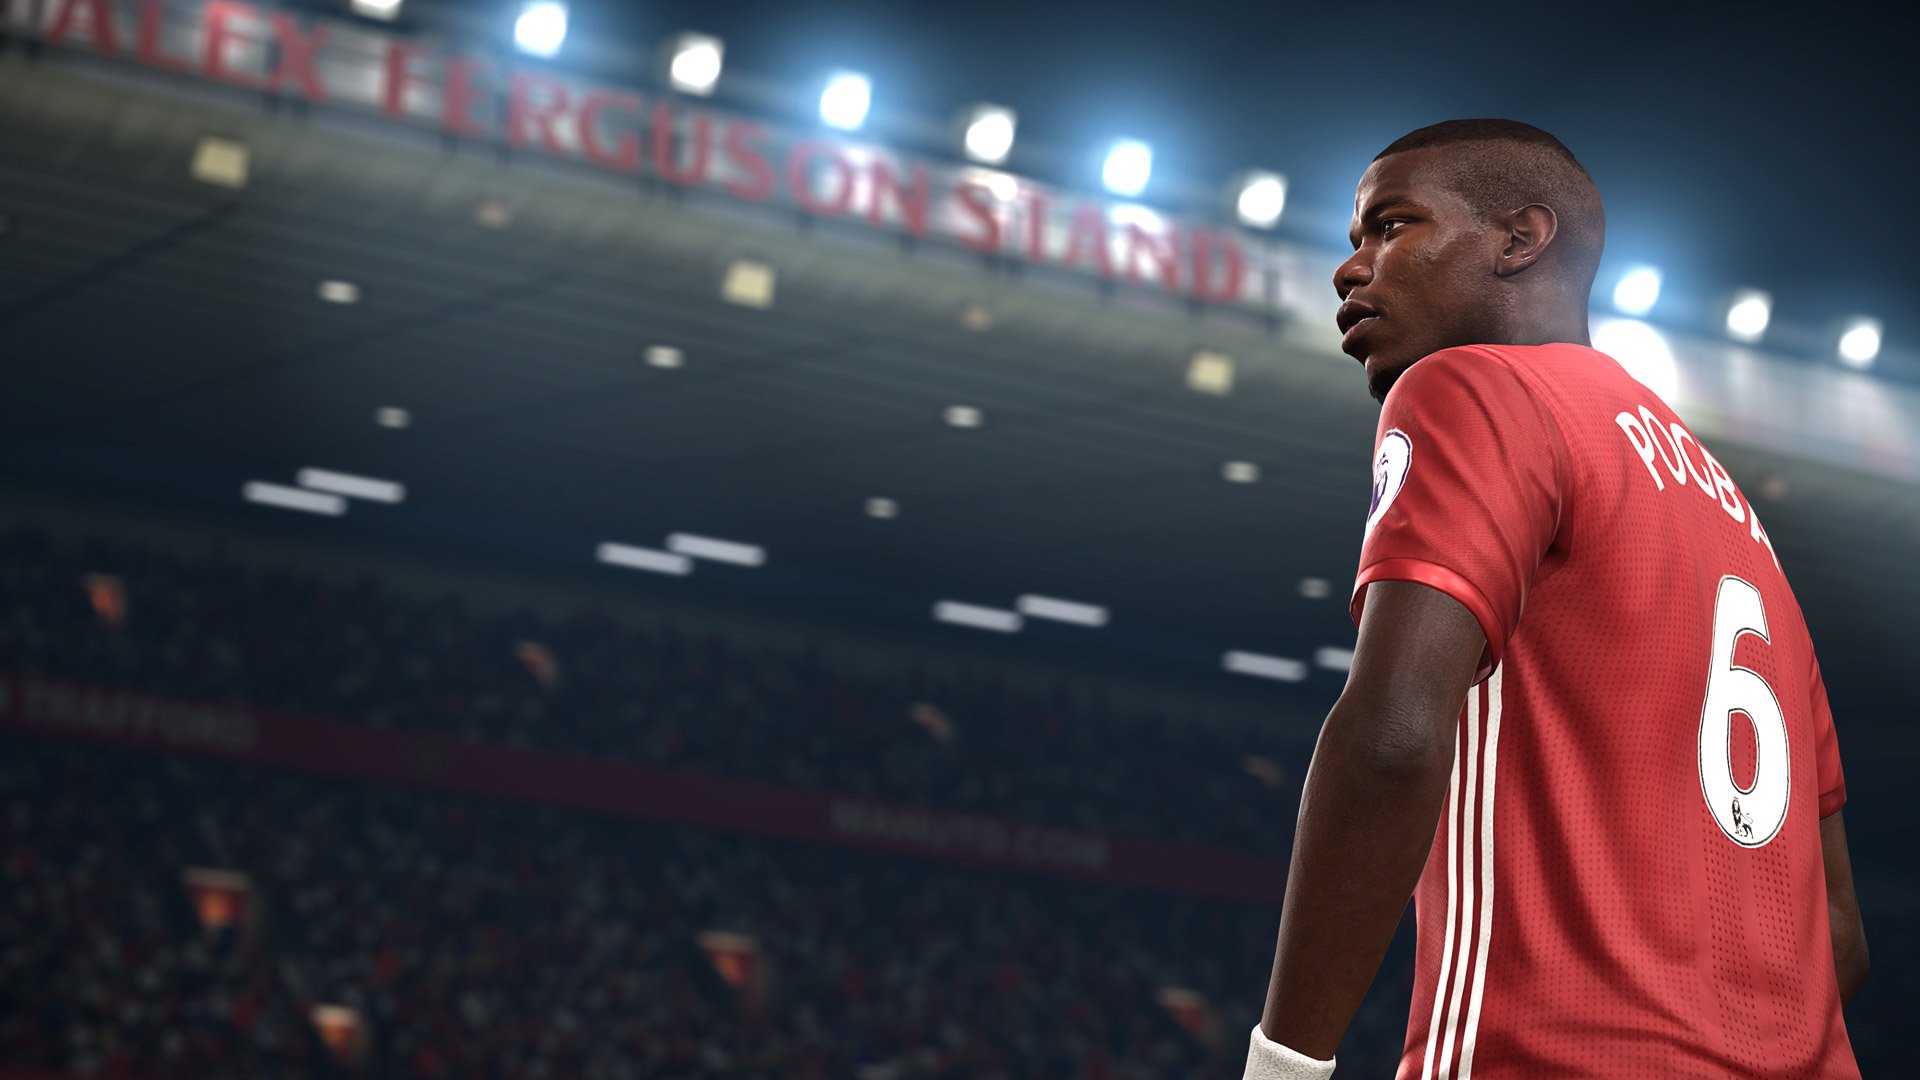 Video Games FiFA Soccer Paul Pogba Manchester United 1920x1080